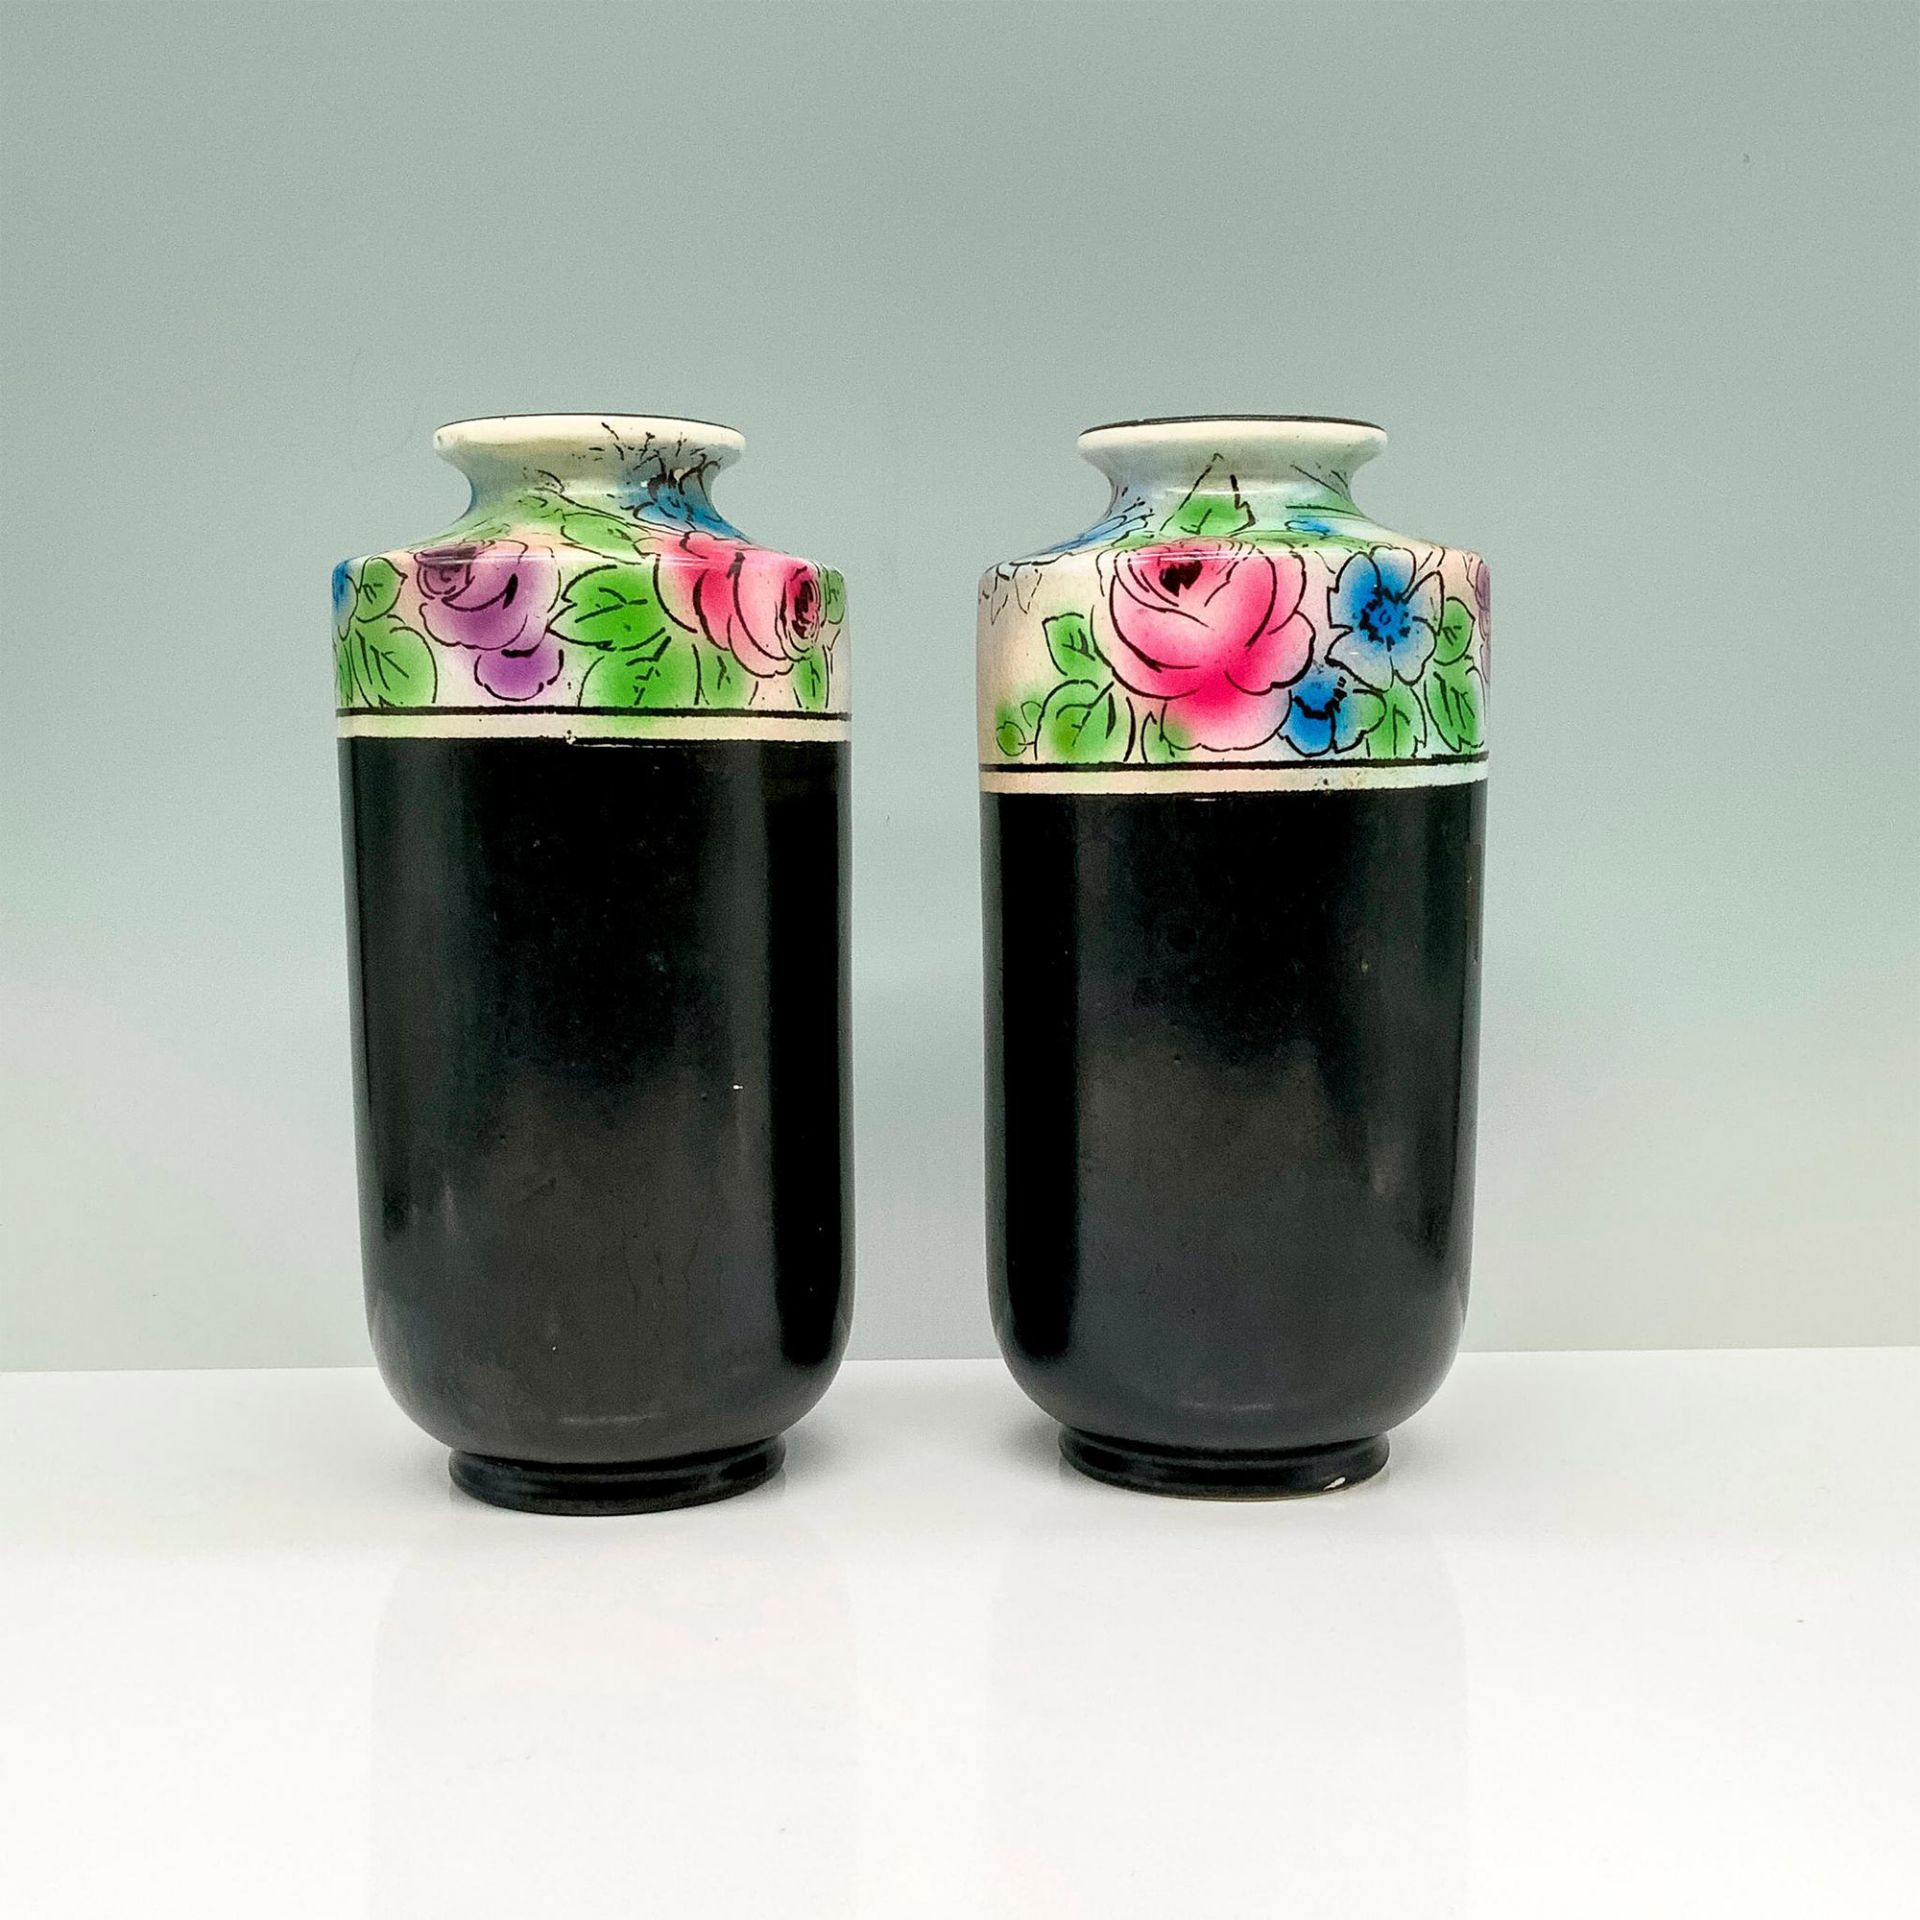 Pair of Shelley Floral Vases, Rosata 8316 - Image 2 of 3